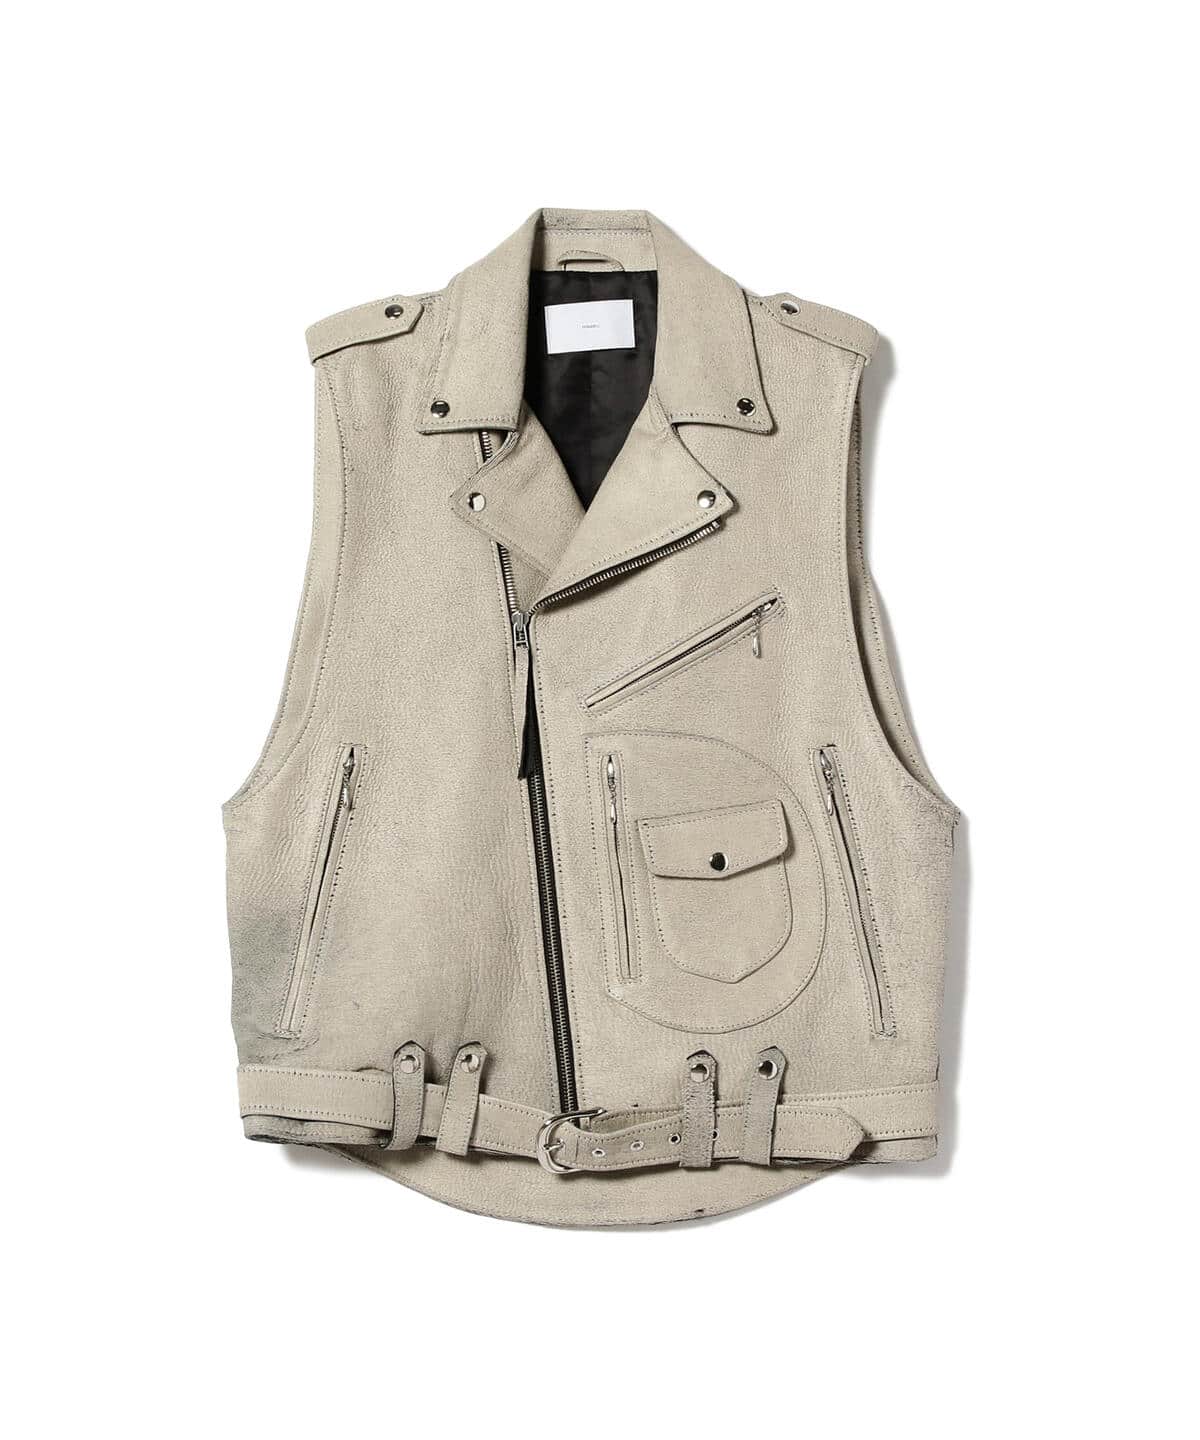 BEAMSビームスSUGAR HILL / Gill Leather Rider's Vestトップス